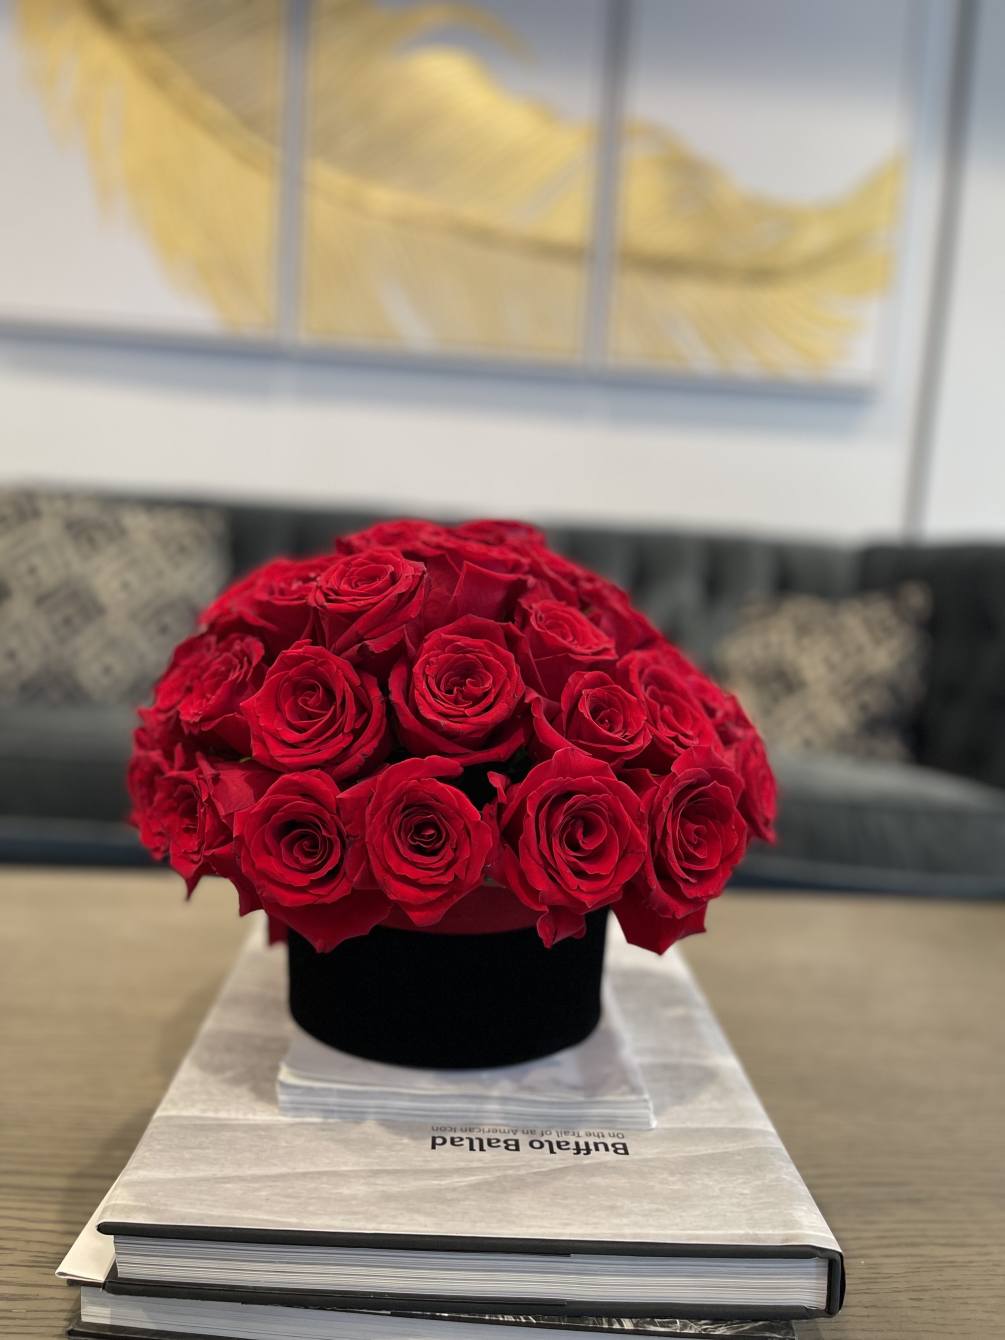 Show them you love them!

 We use only AAA graded red roses